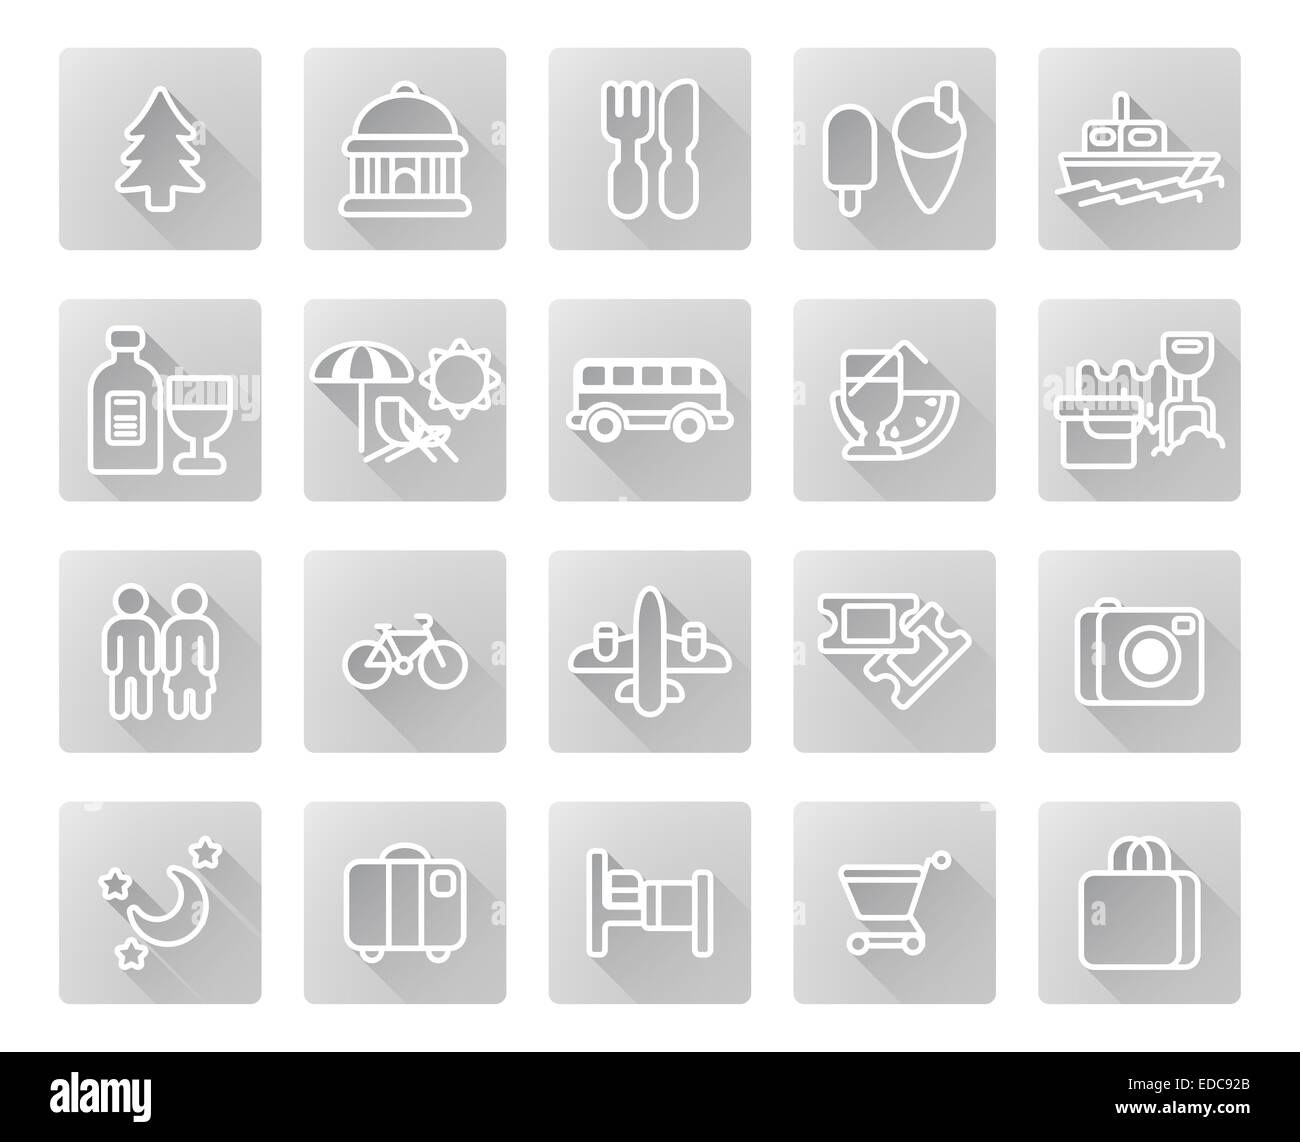 Travel and tourism icon set including icons for nightlife, museums, dining, beaches and may more Stock Photo